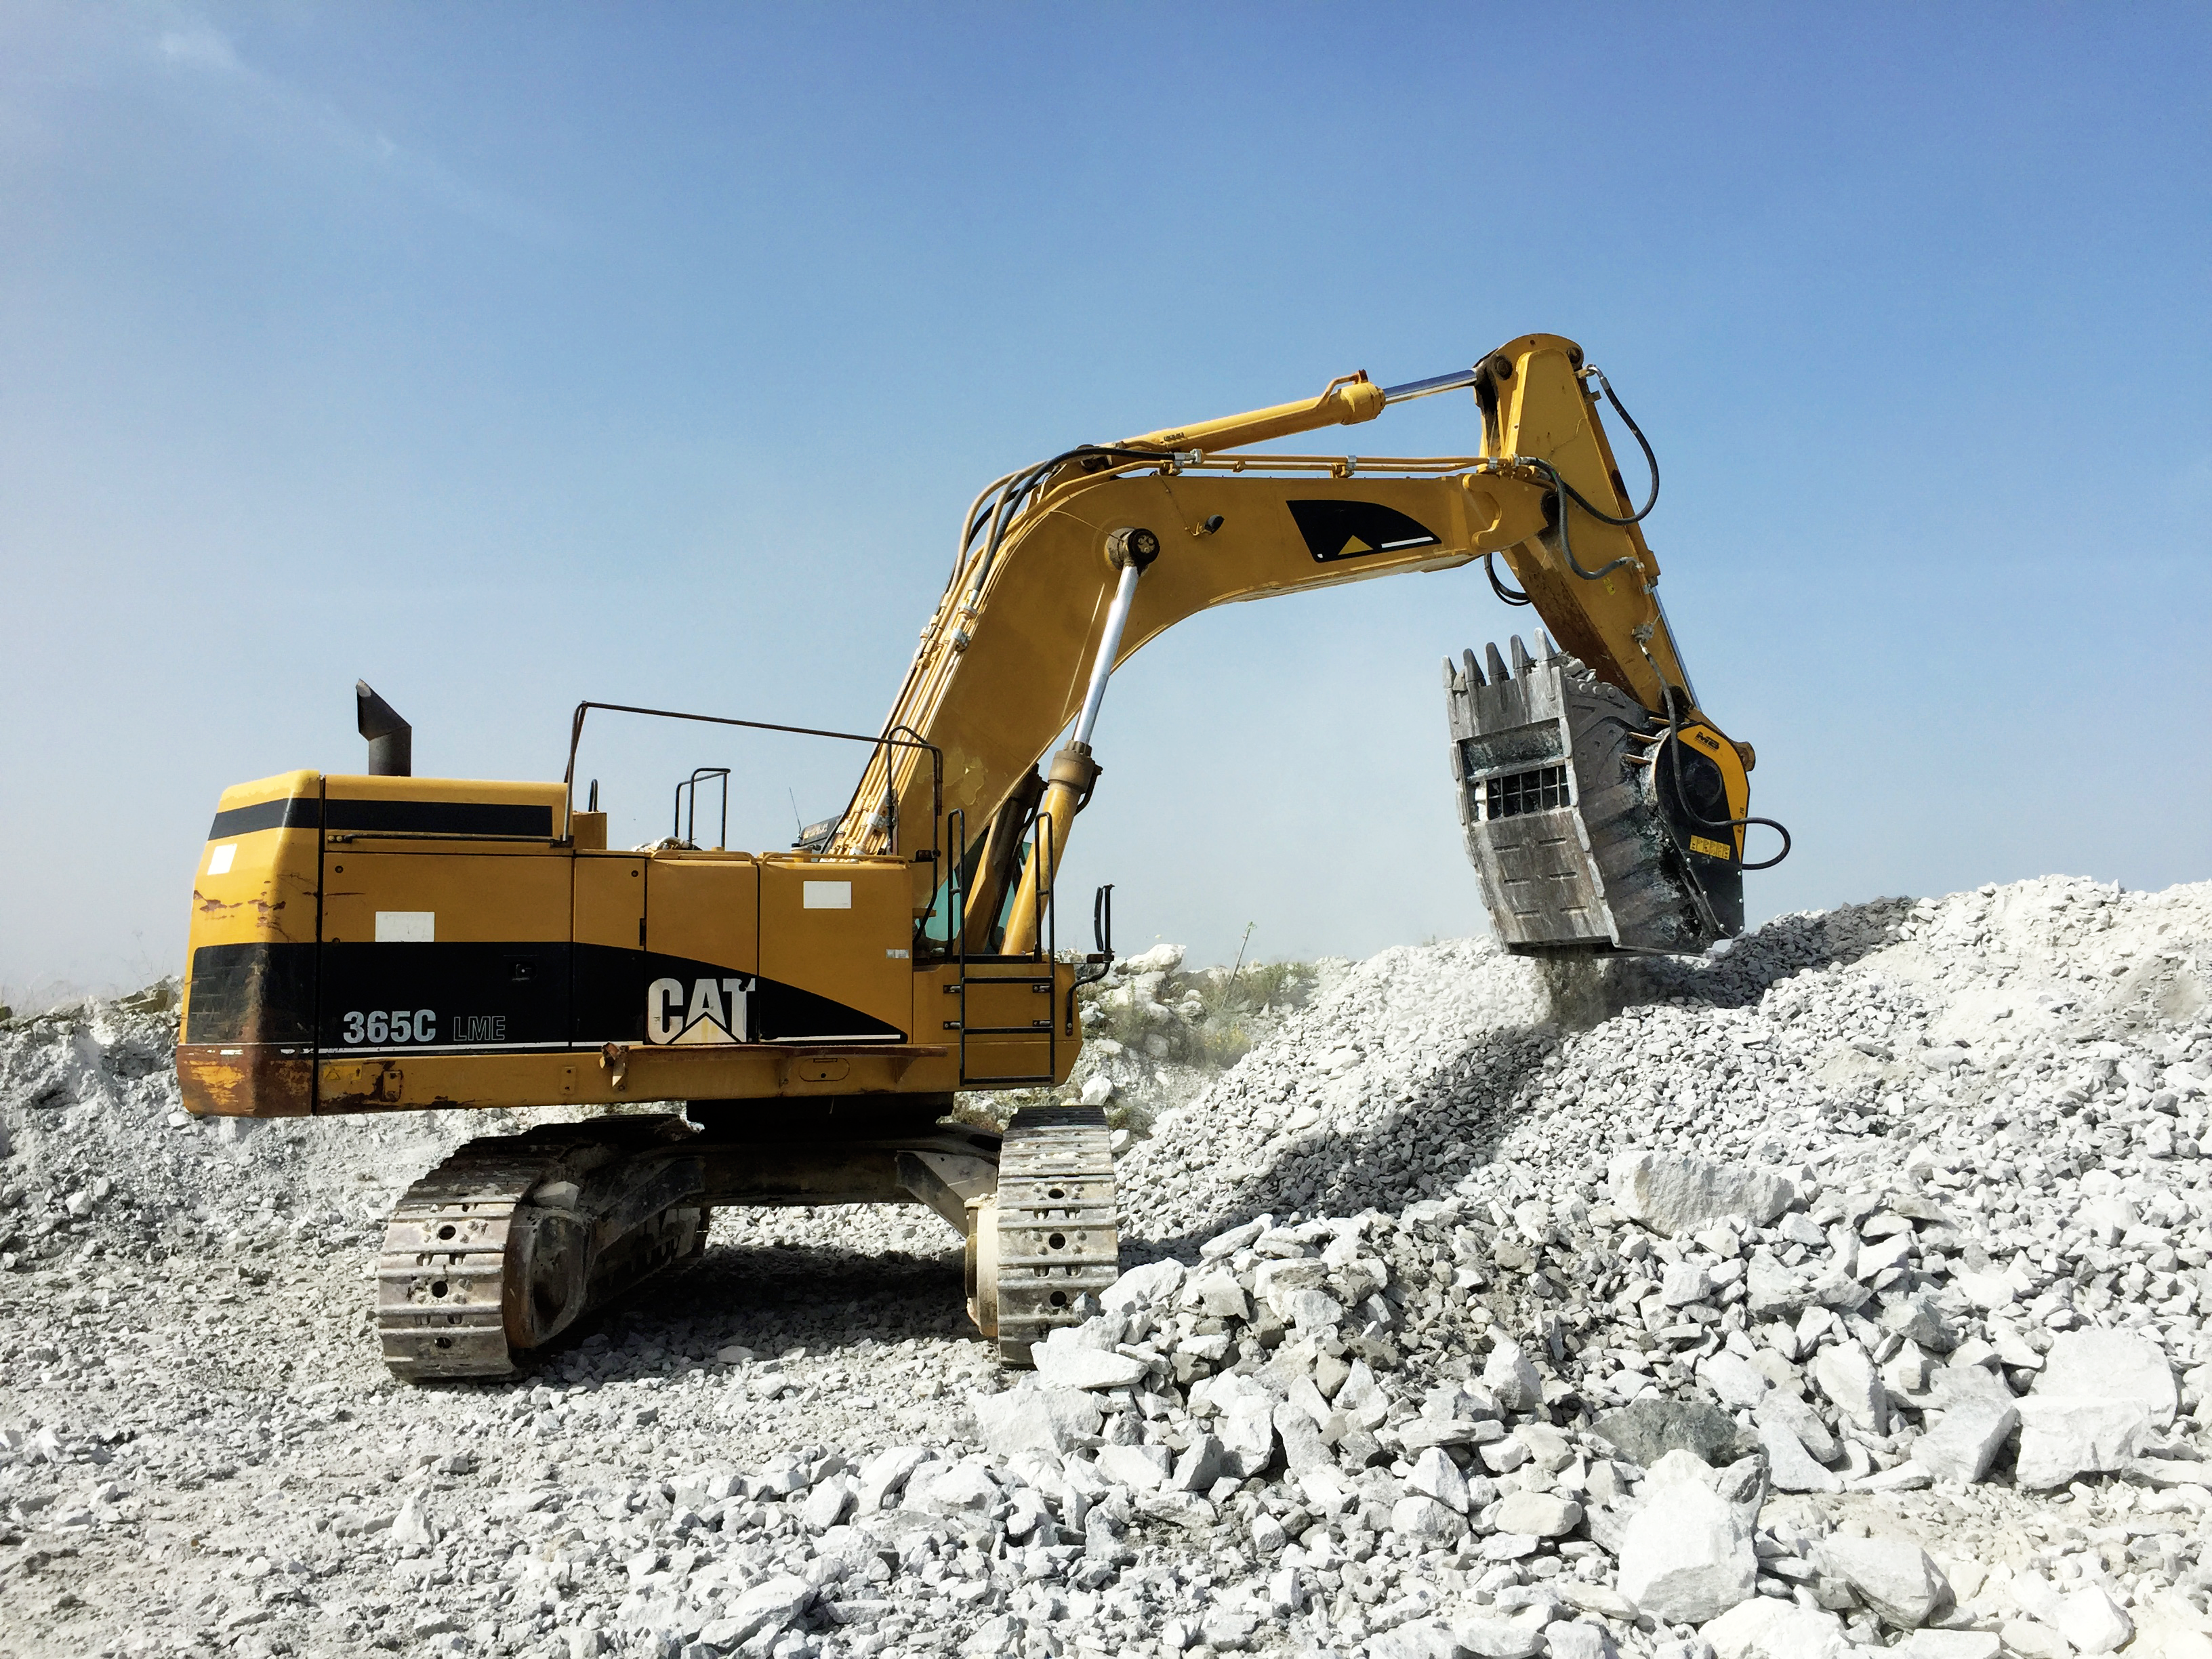 MB Crusher Bucket BF135 on a Cat